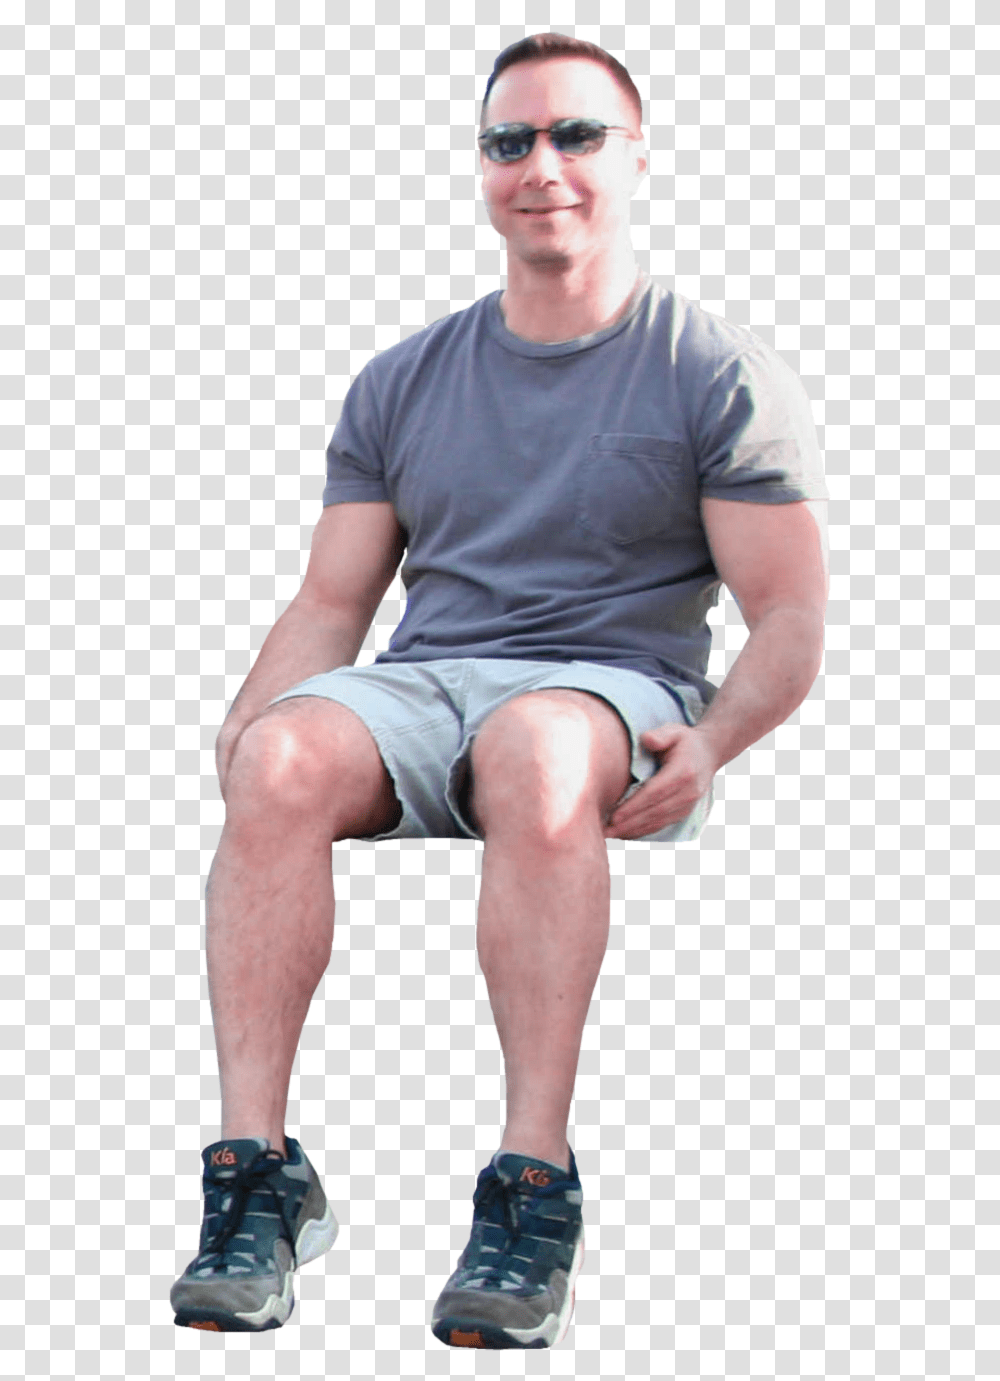 Person Sitting In Chair Front View 6 Image Sitting Man, Shoe, Footwear, Clothing, Sunglasses Transparent Png